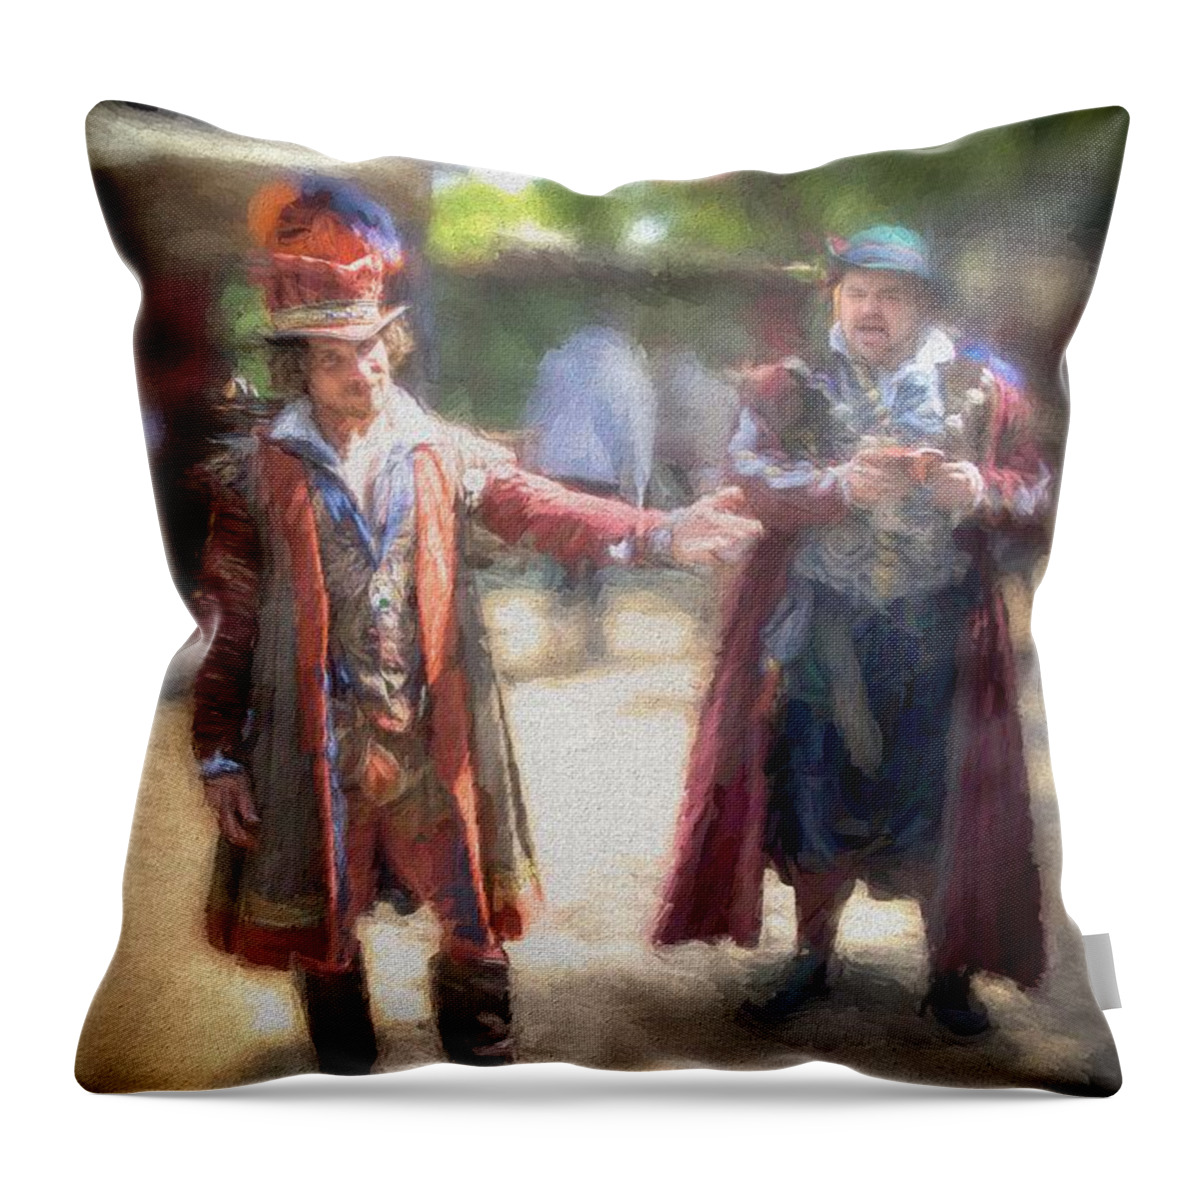 Old Throw Pillow featuring the photograph Repay Your Debt by Ike Krieger